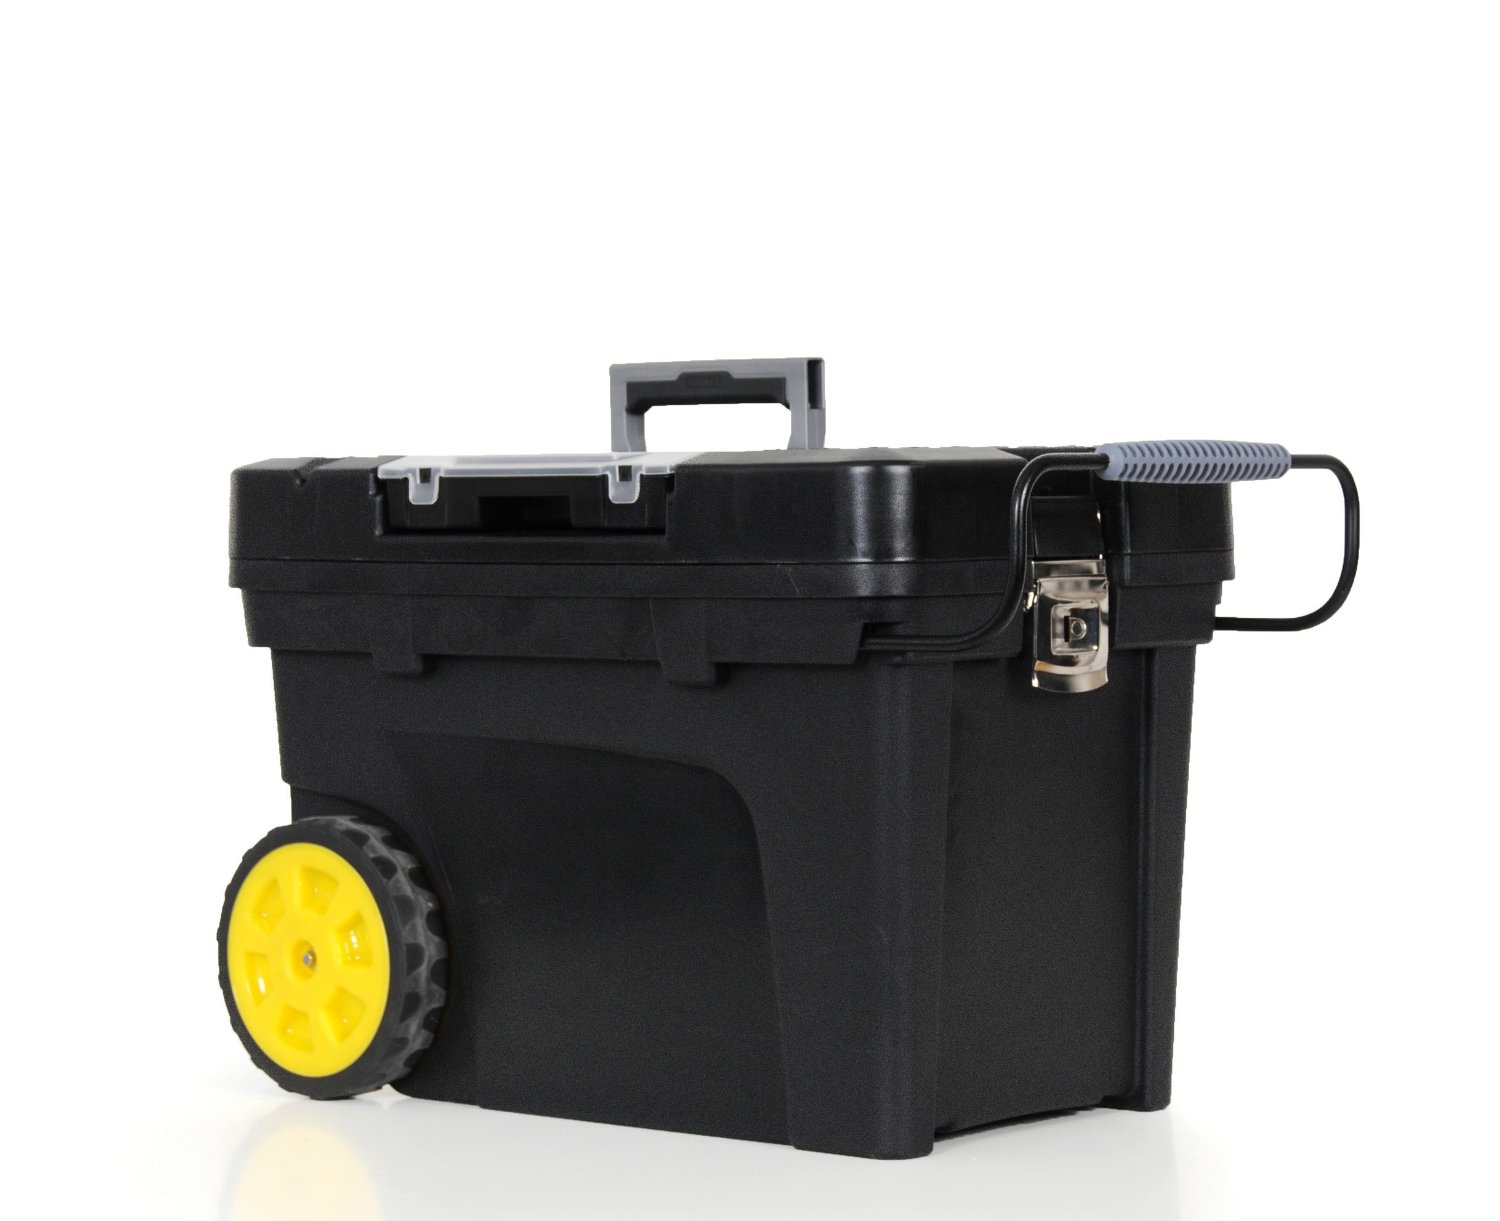 Stanley 033026R Pro Contractor Chest